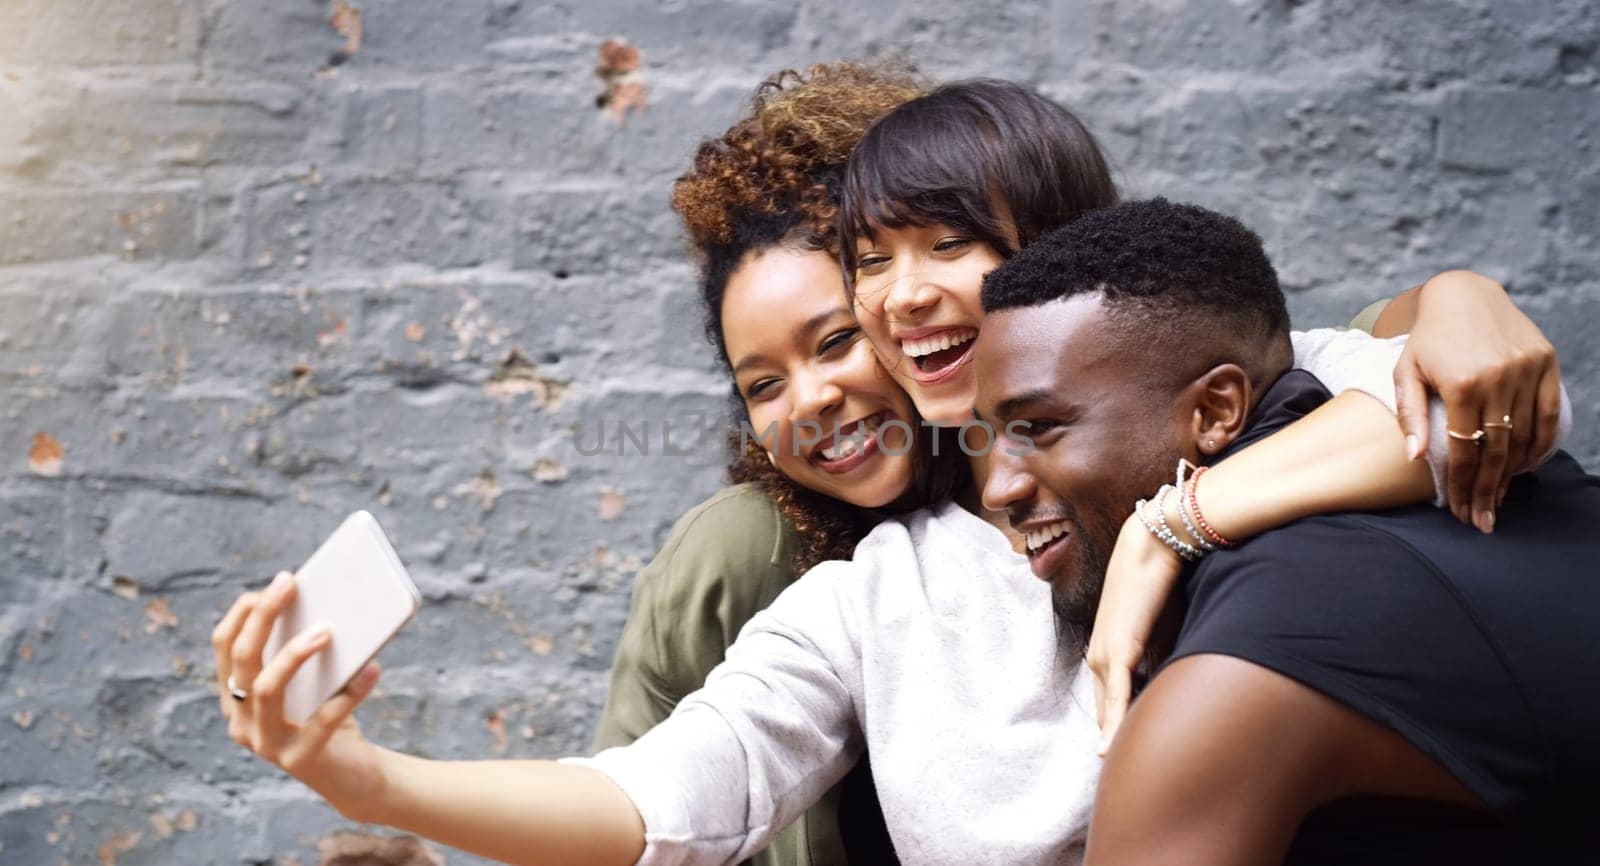 Selfie, social media and smile with friends on brick wall background for profile picture update. App, energy or excitement with happy man and woman group in city for mobile or online photography.